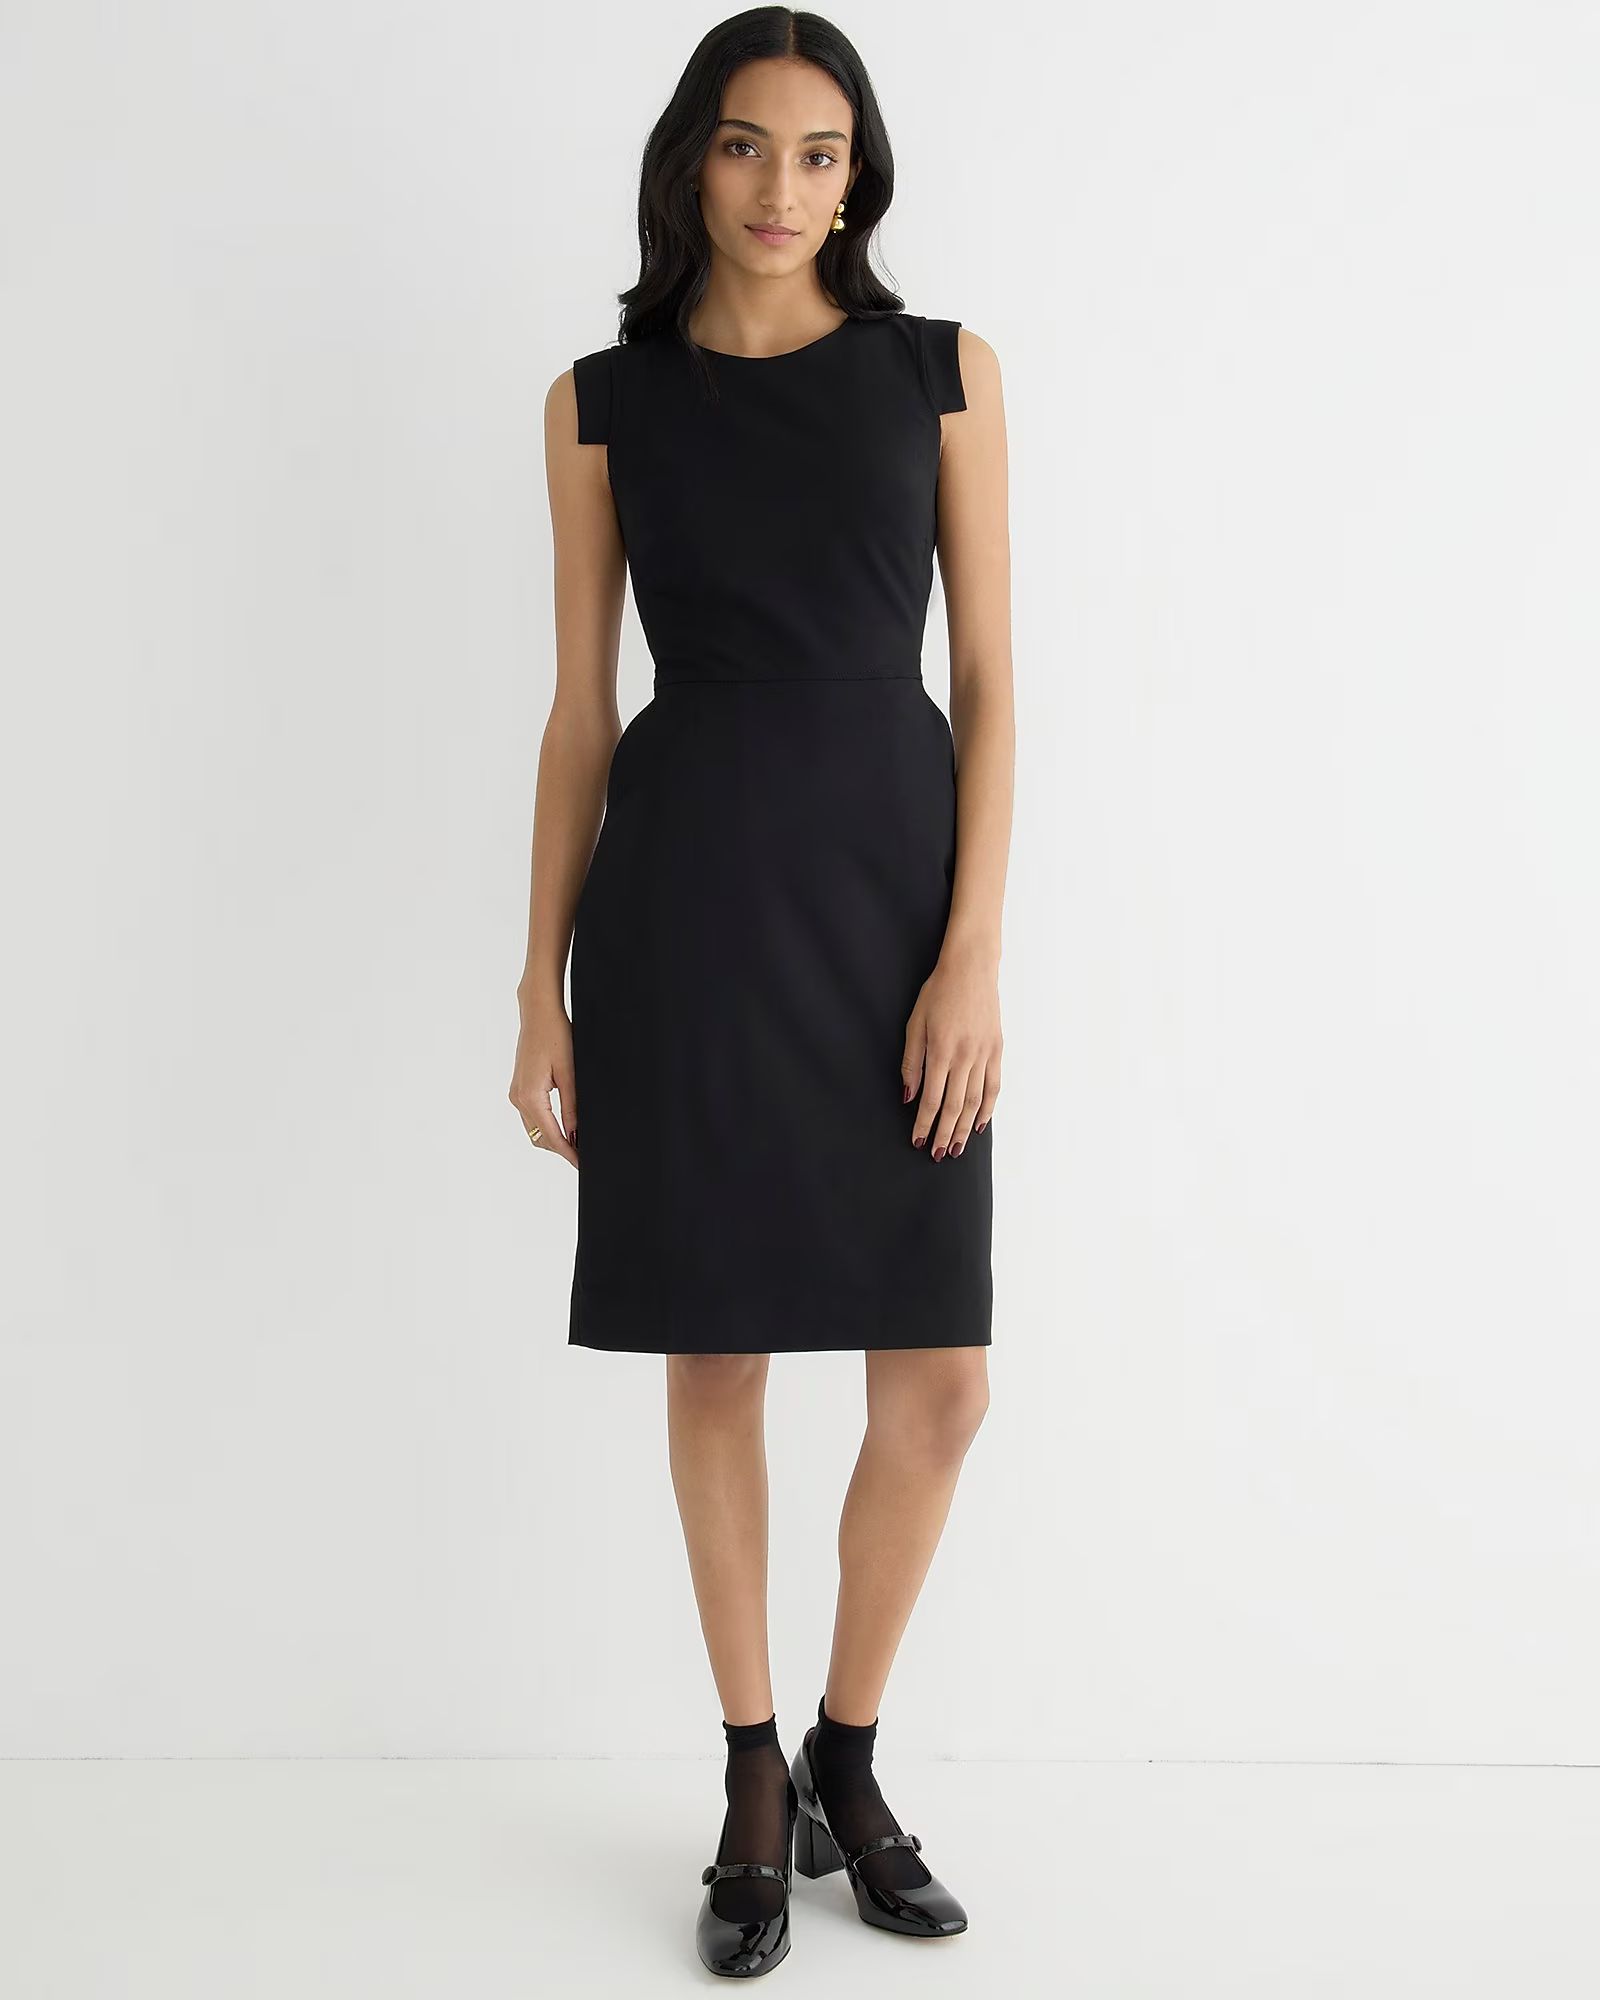 top rated4.4(196 REVIEWS)Resume dress$134.50$228.00 (41% Off)Dress Event. 40% off.BlackClassicPet... | J.Crew US